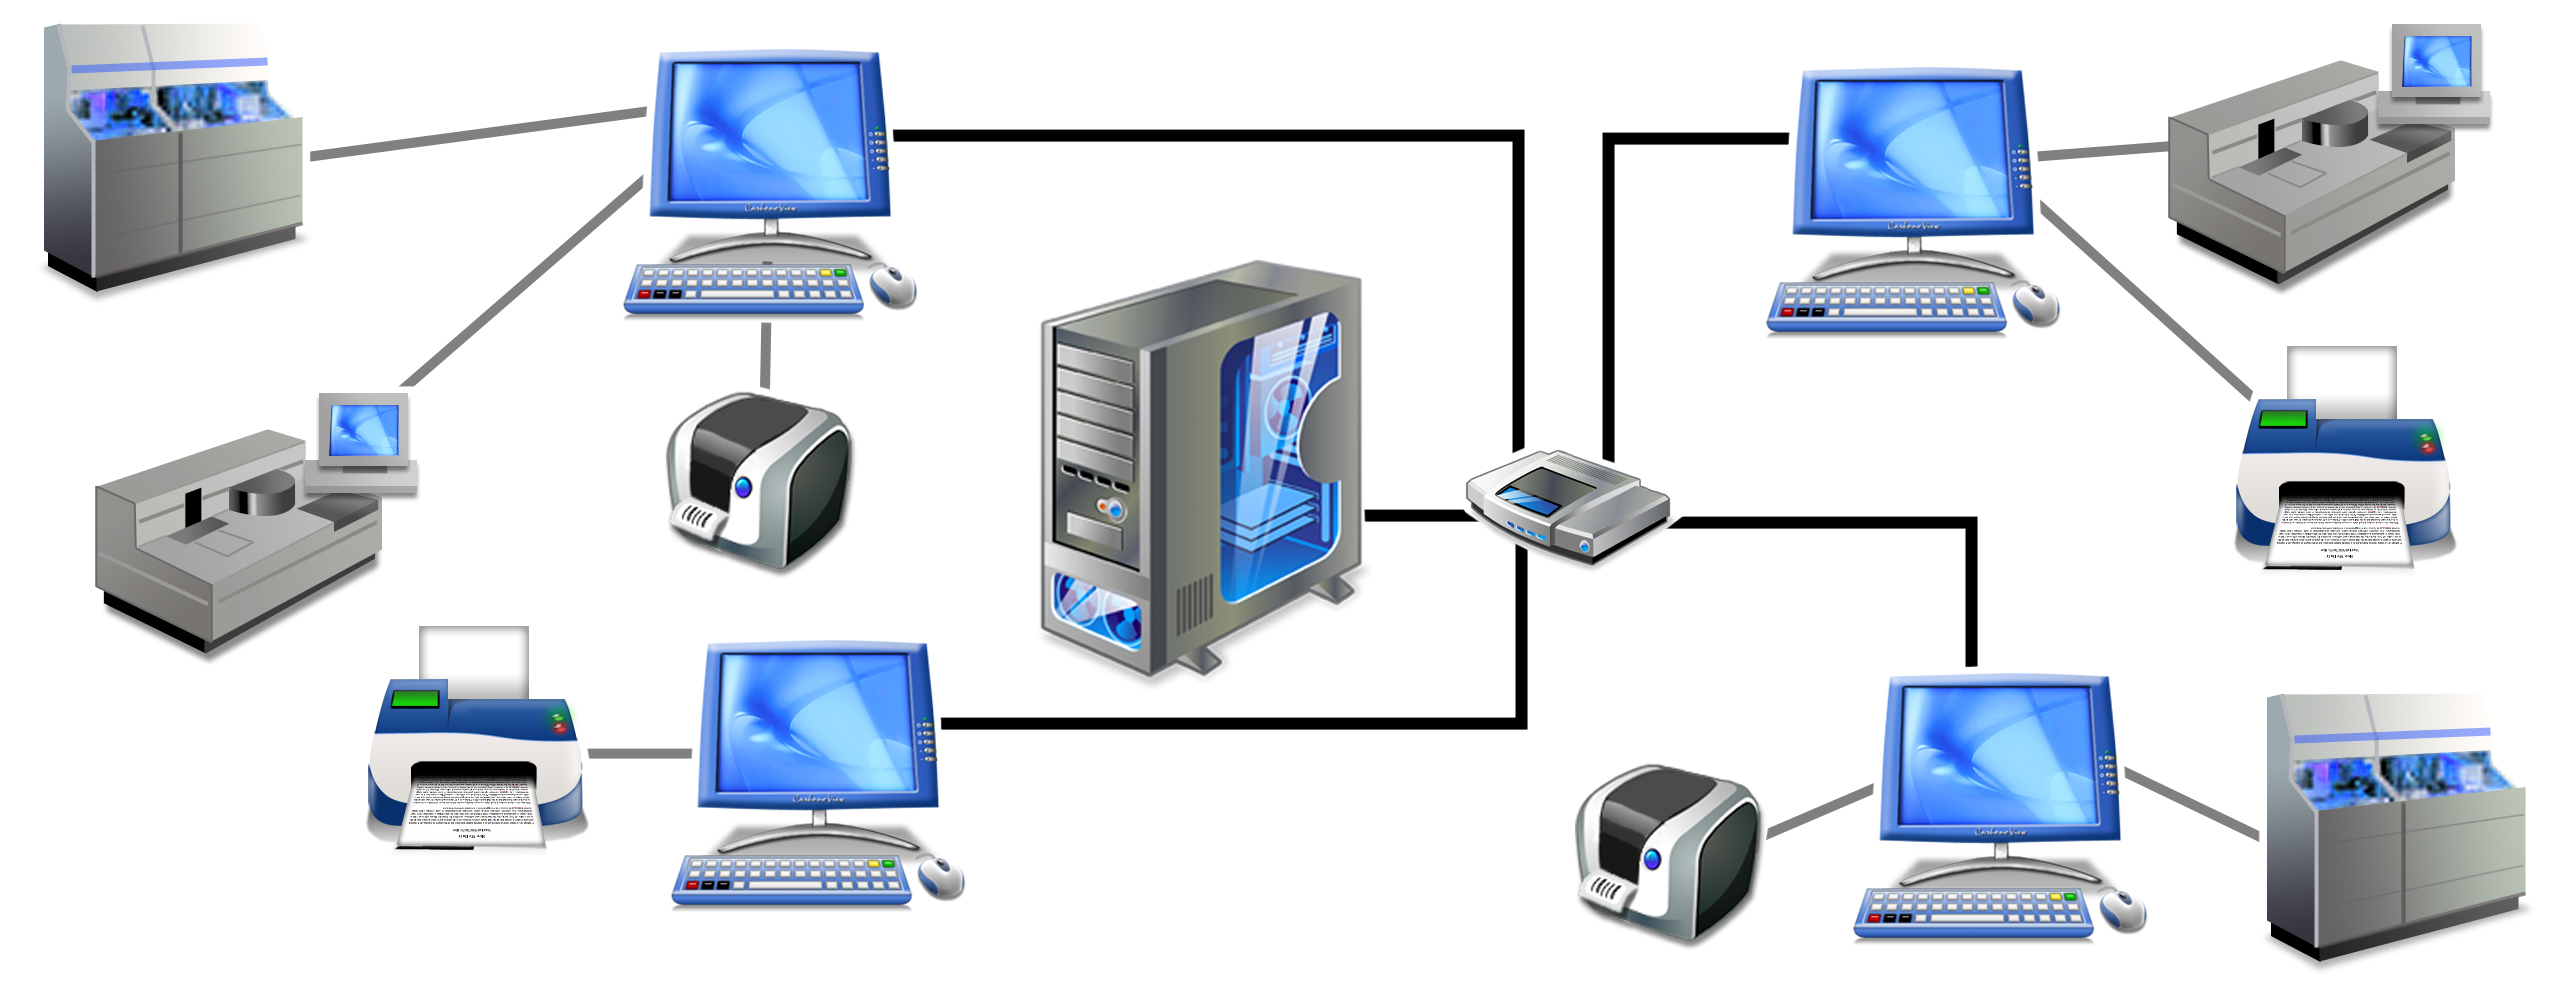 computer network clipart - photo #46